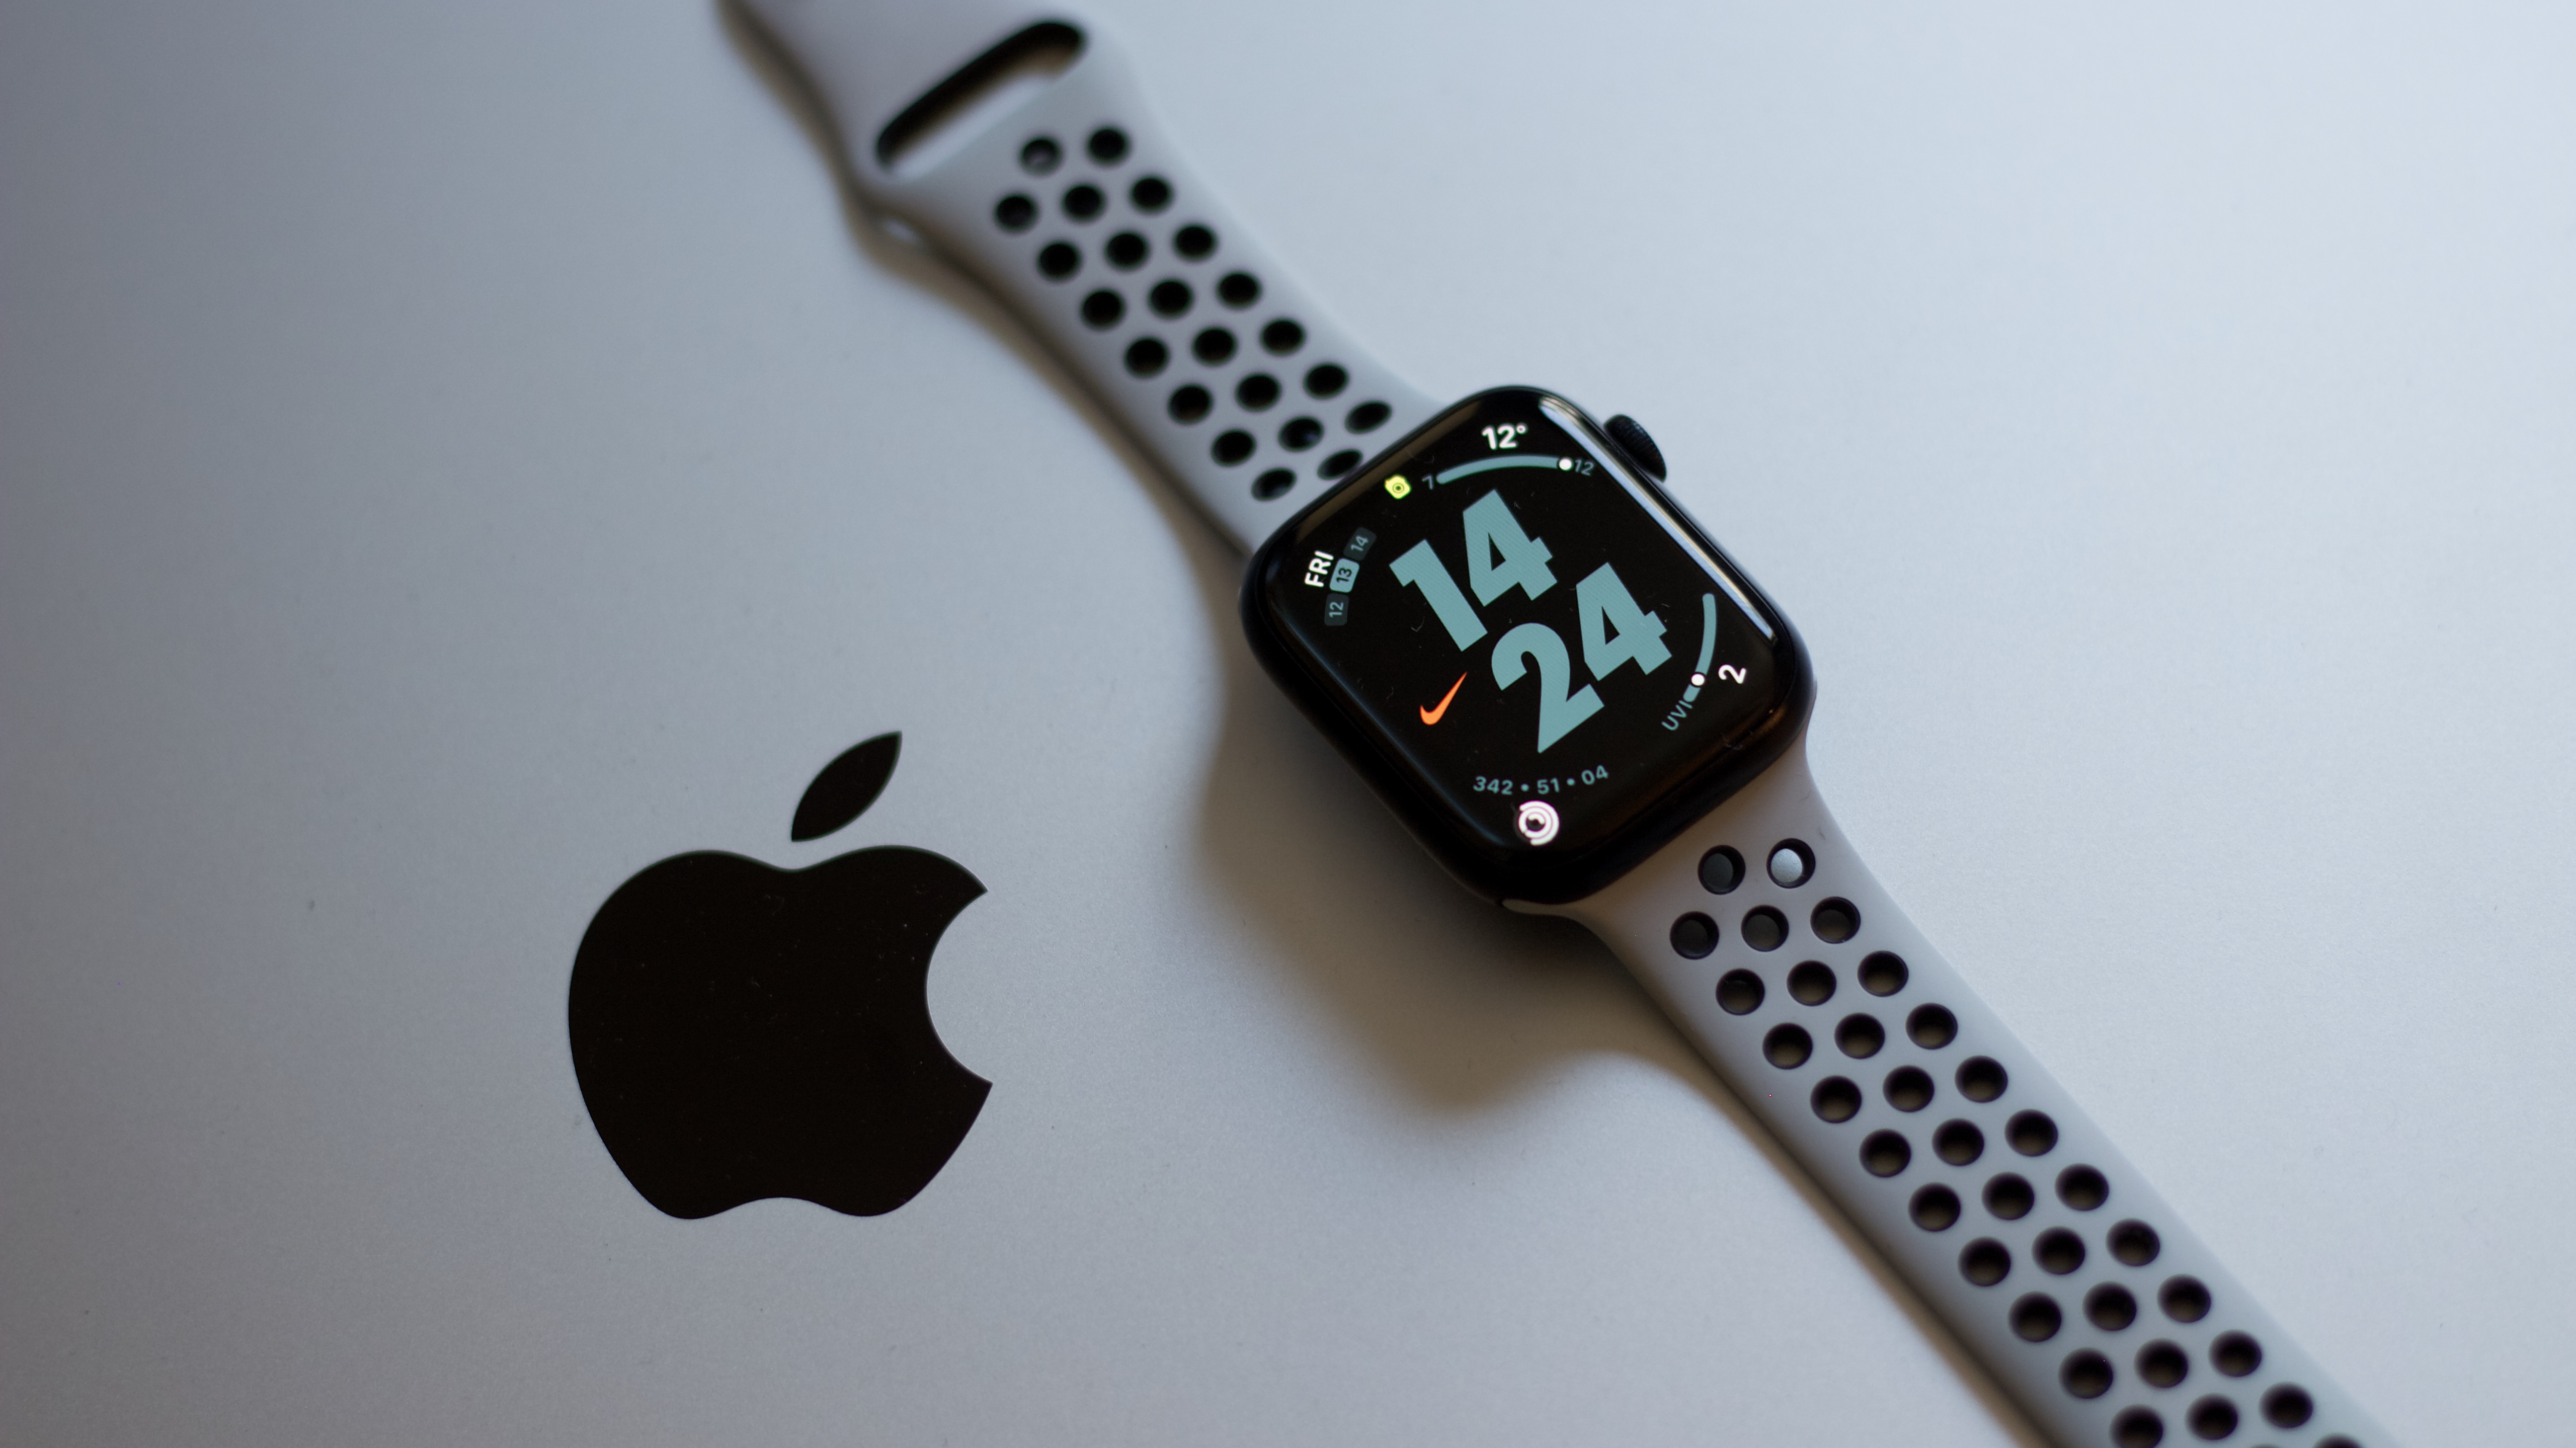 watchOS 10.4 has fixed one of the Apple Watch's most annoying bugs — “ghost touch” no longer affecting users